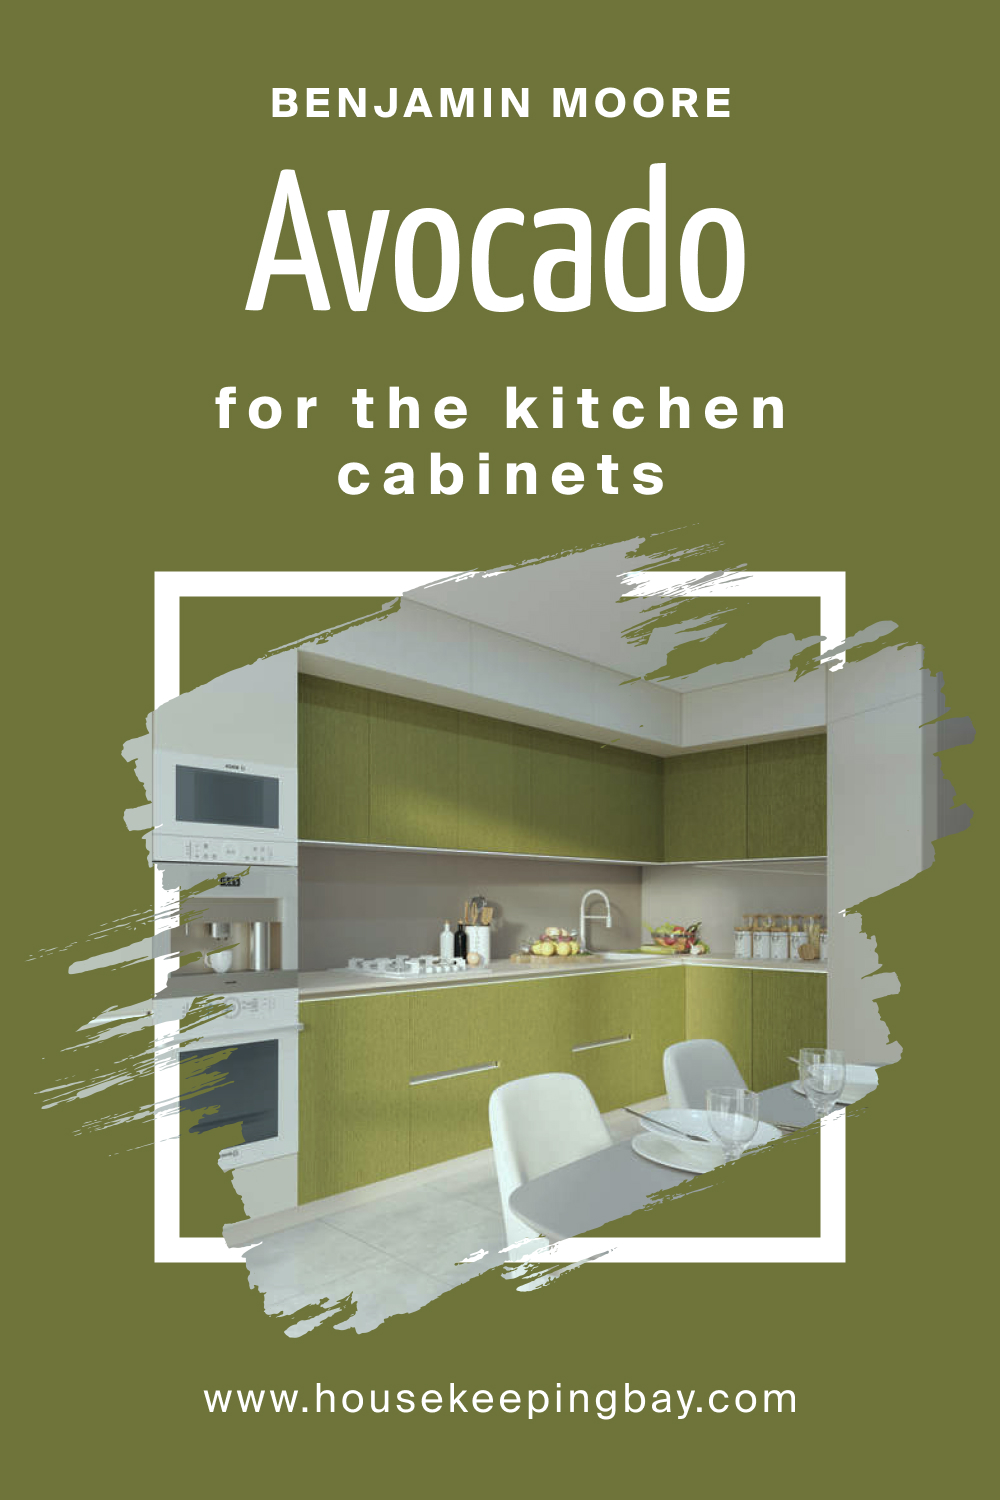 How to Use BM Avocado 2145-10 on Kitchen Cabinets?